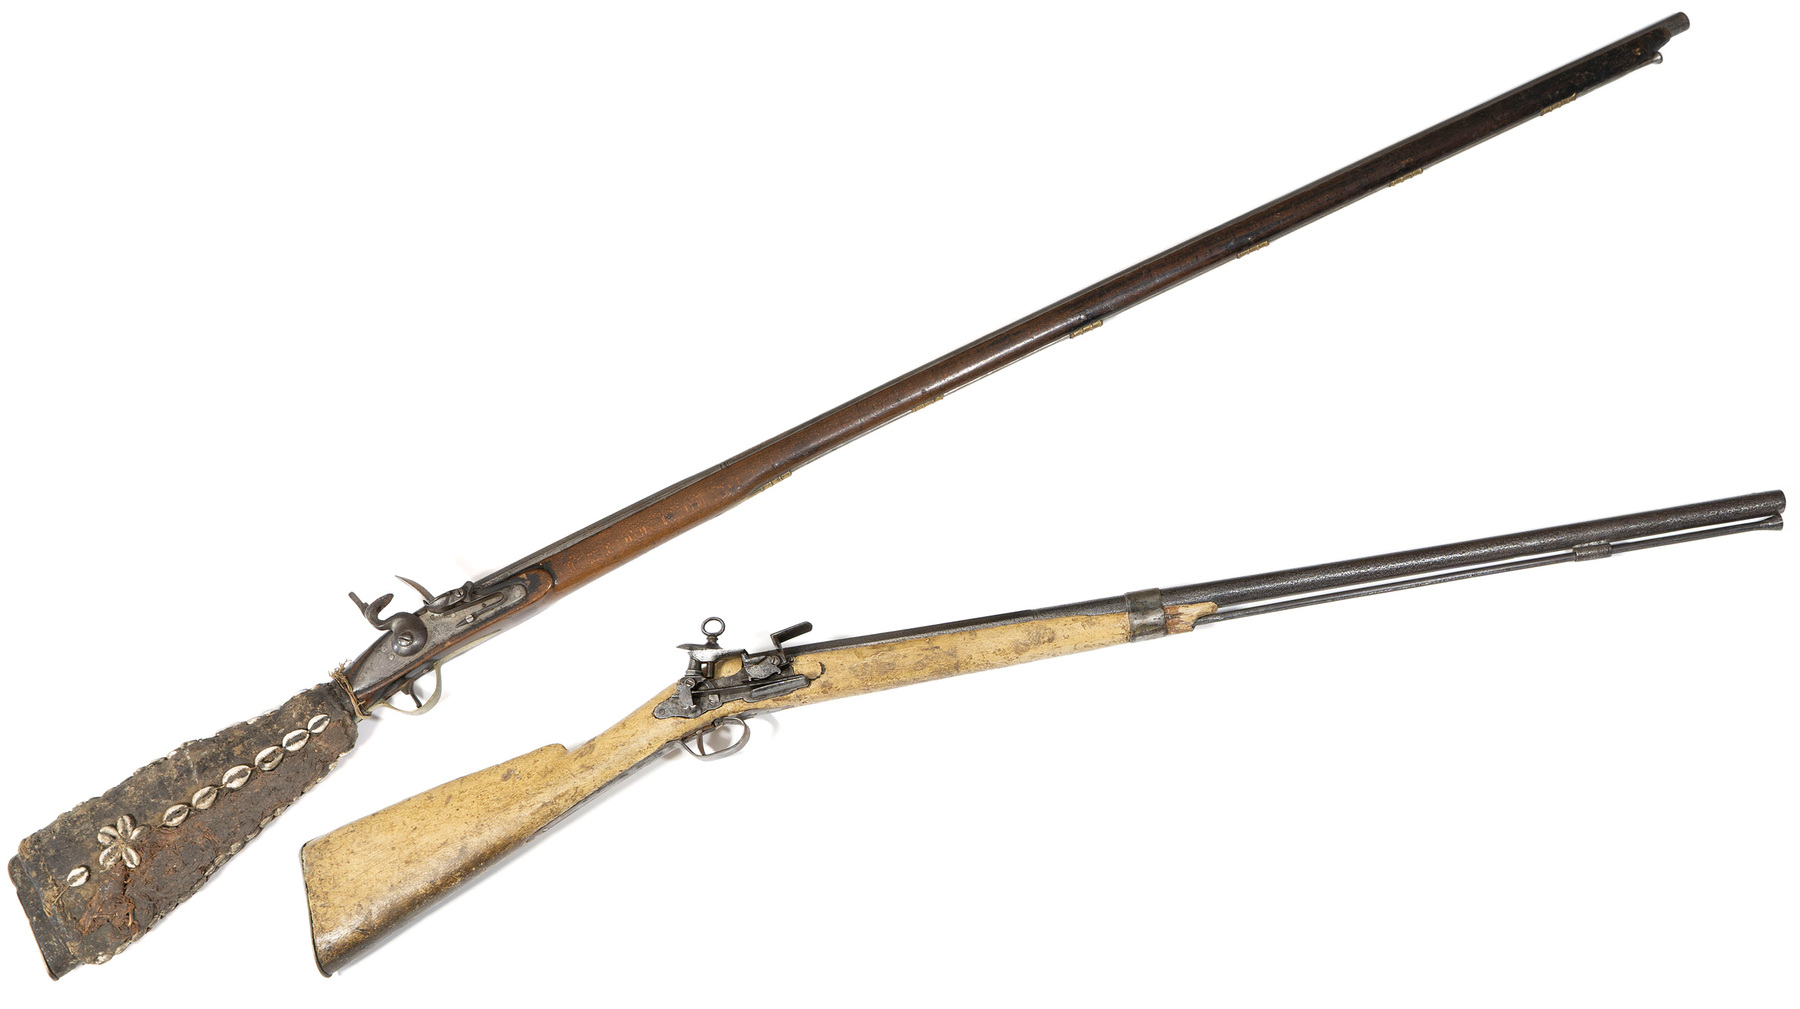 Trade guns. A large rifle, almost two metres long, with a dark wooden body and steel barrel and mechanism. The butt is coated in a fibrous material and is decorated with strings of cowrie shells. Also a flintlock rifle with a light wooden butt and handle, with a steel mechanism and barrel.